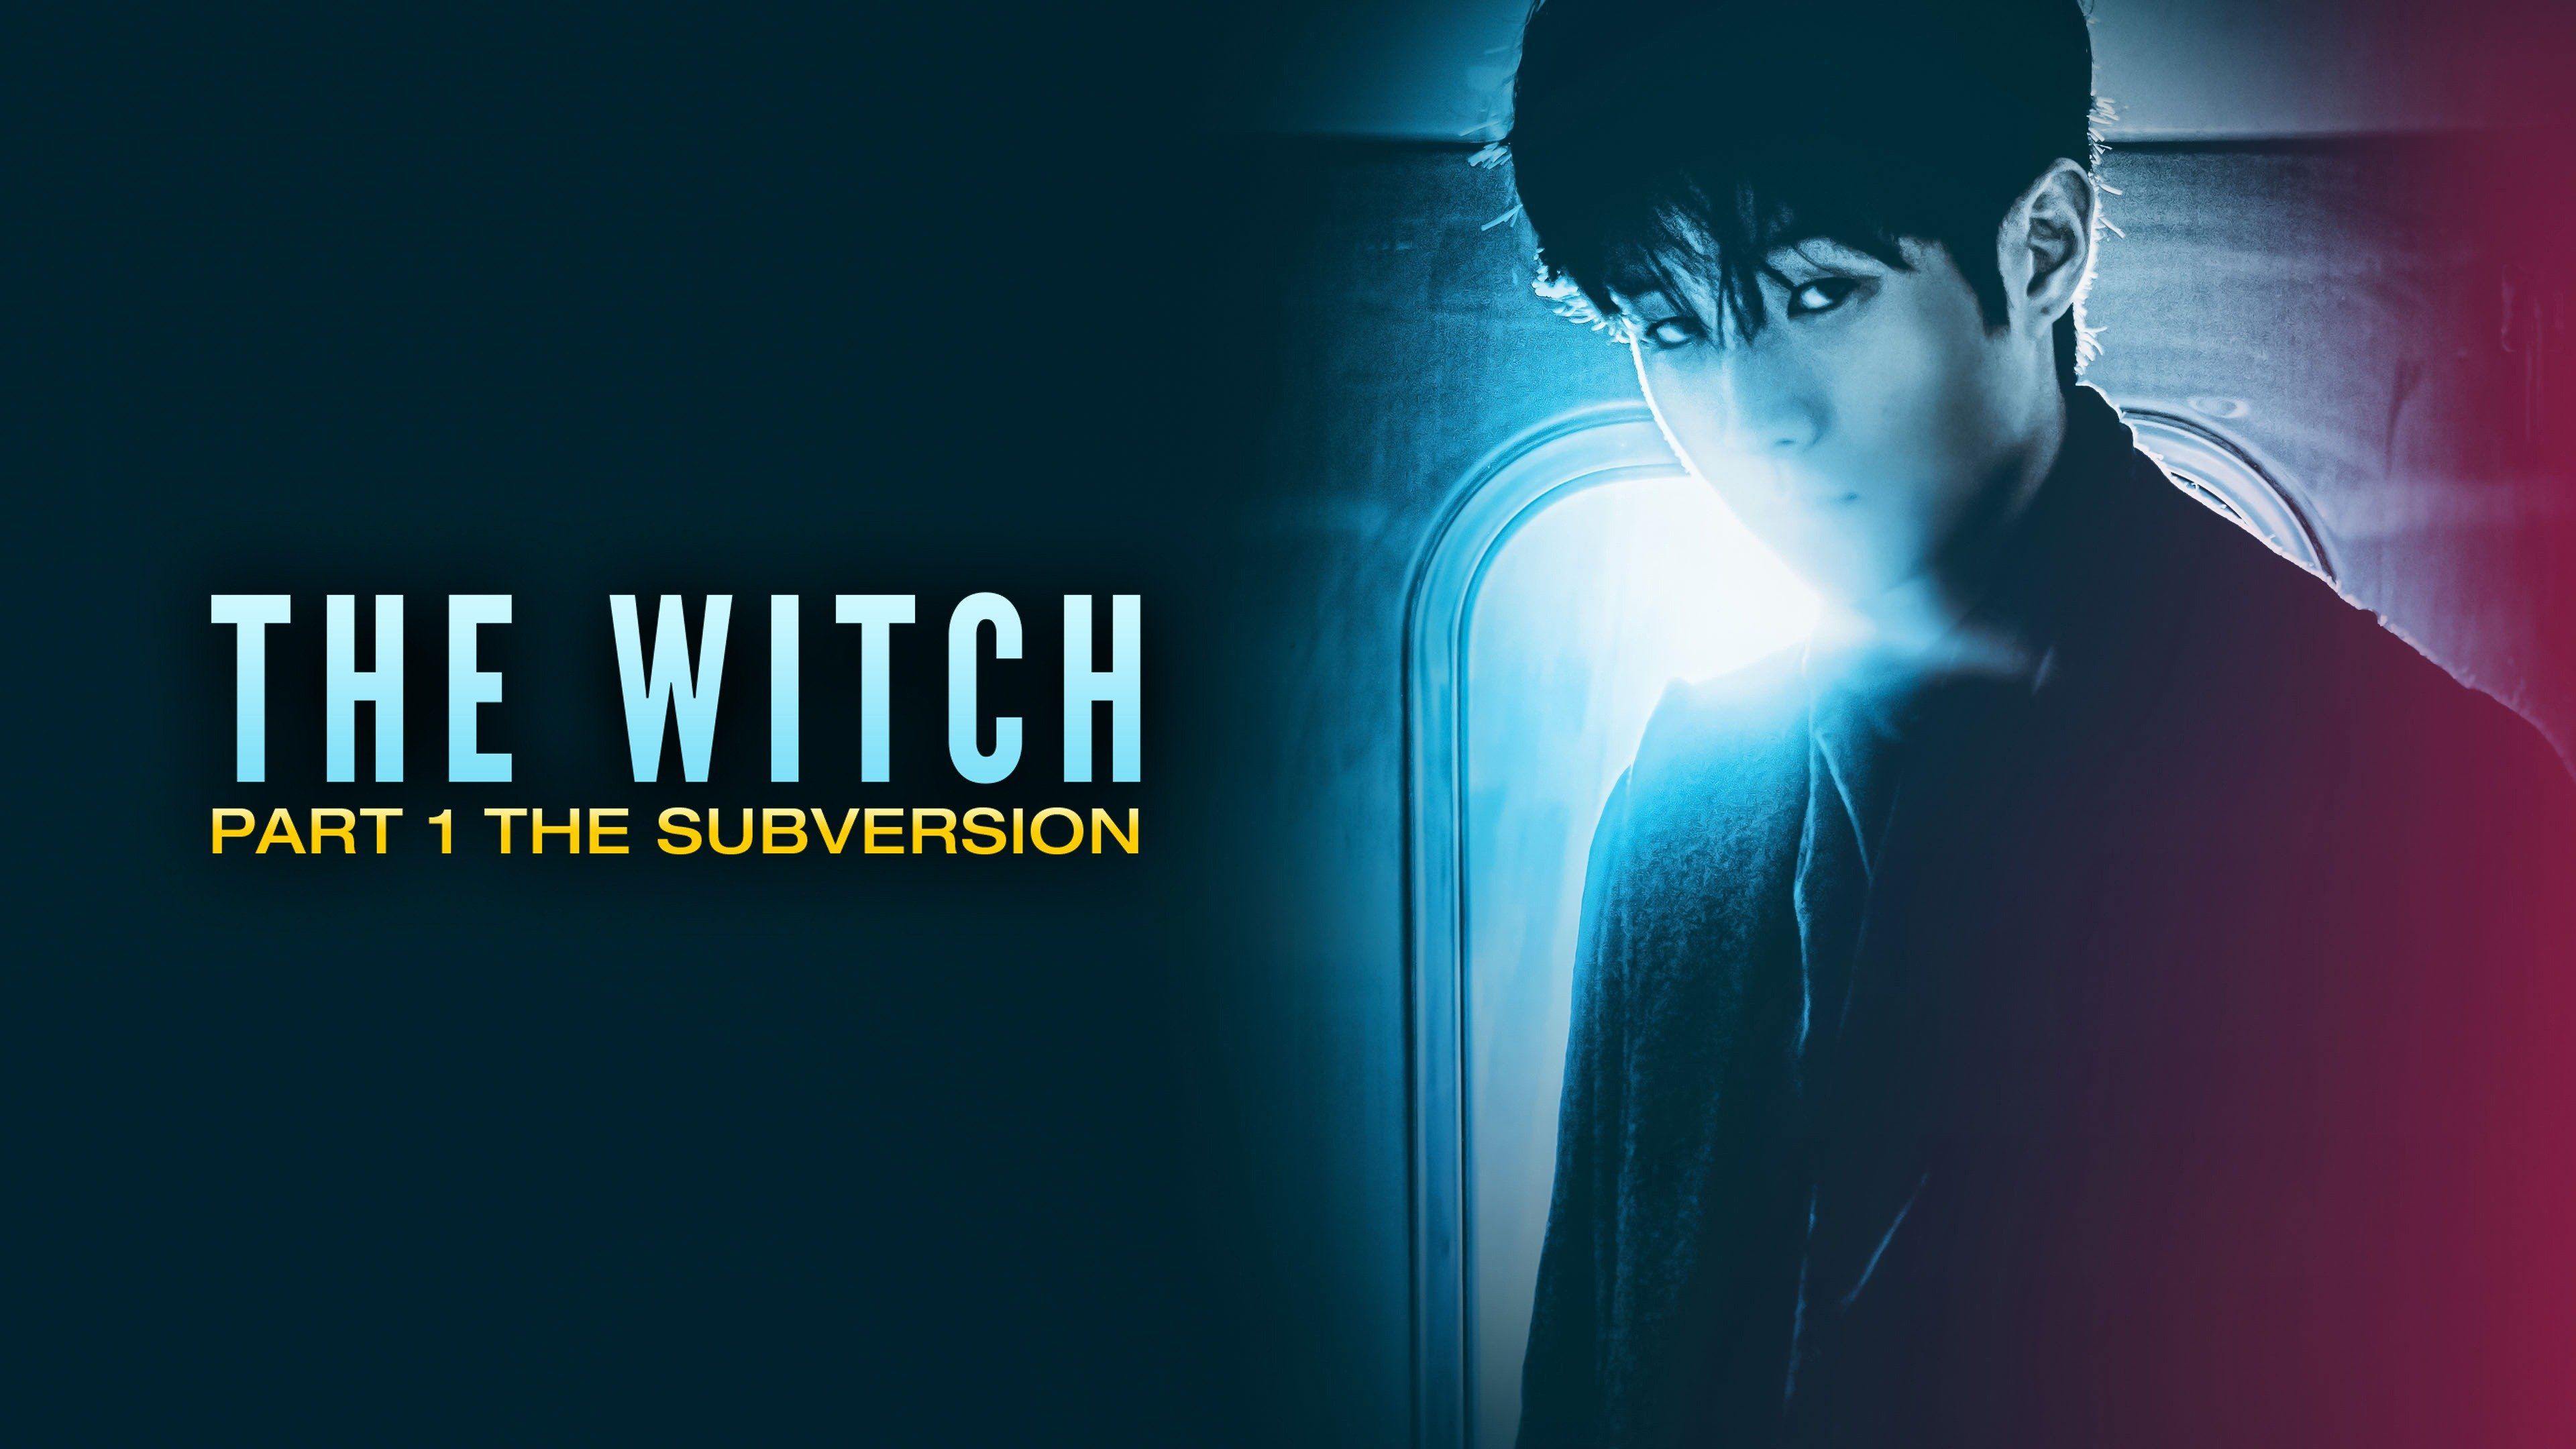 the witch part 1. the subversion summary